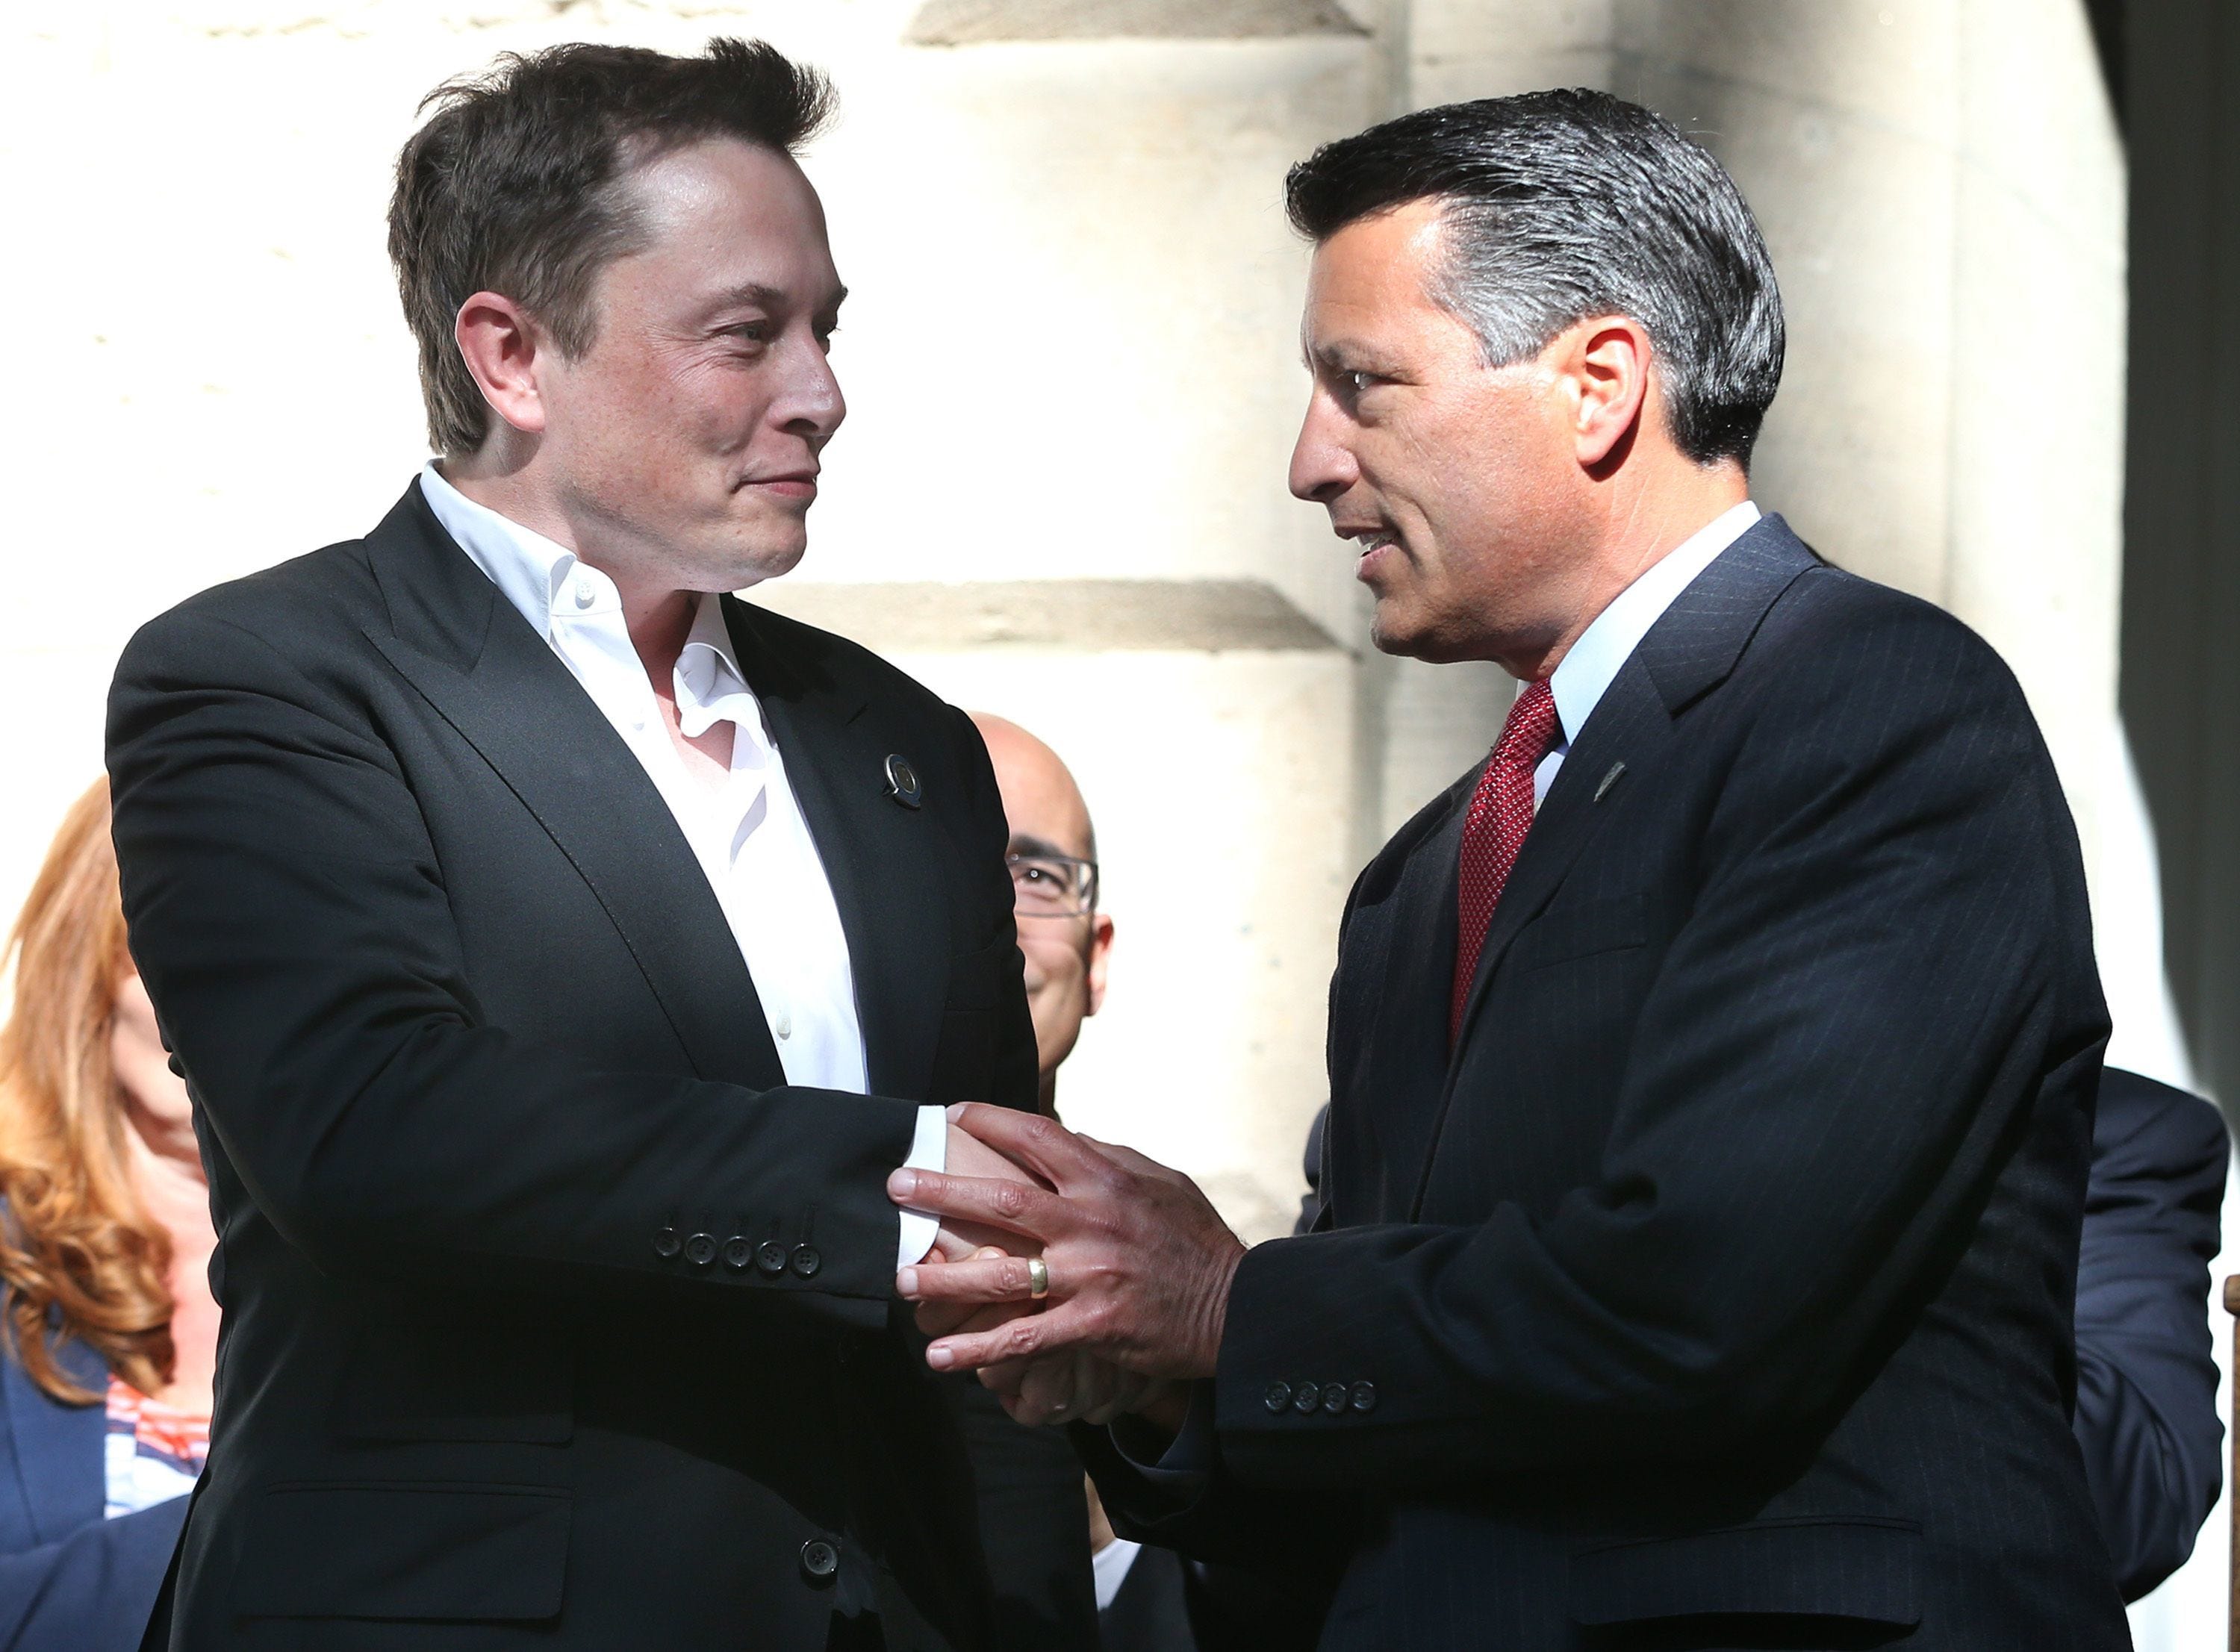 Tesla CEO Elon Musk, left, and former Nevada Gov. Brian Sandoval shake hands following the 2014 announcement that the carmaker would build its $5 billion Gigafactory outside Reno.